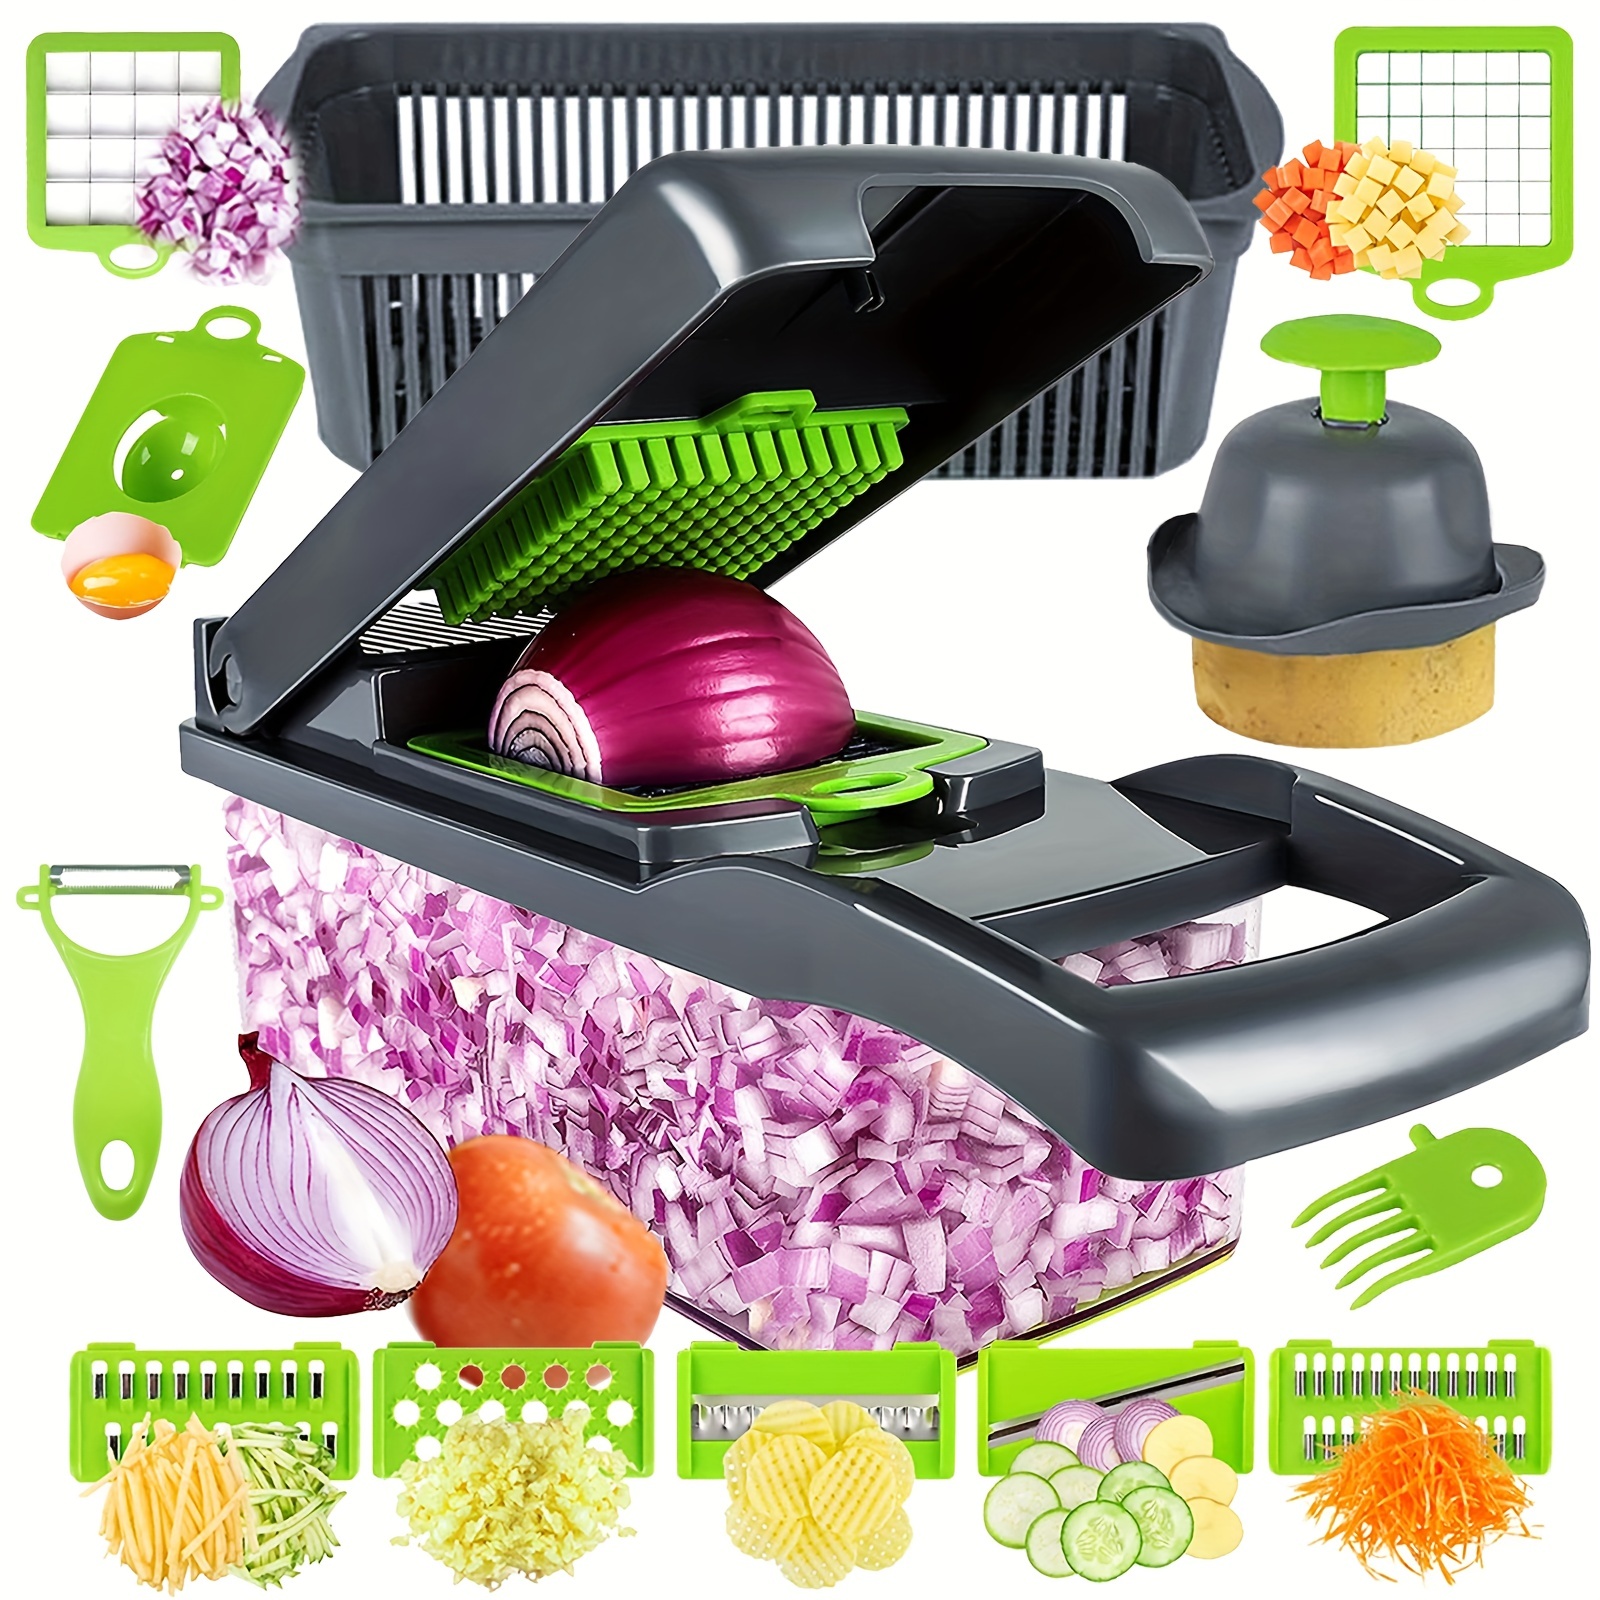 SPLMIFA Vegetable Chopper - Adjustable Vegetable Slicer - Kitchen Gift  Gadget Slicer for Salad Potatoes Carrots Garlic with Container Onion  Chopper